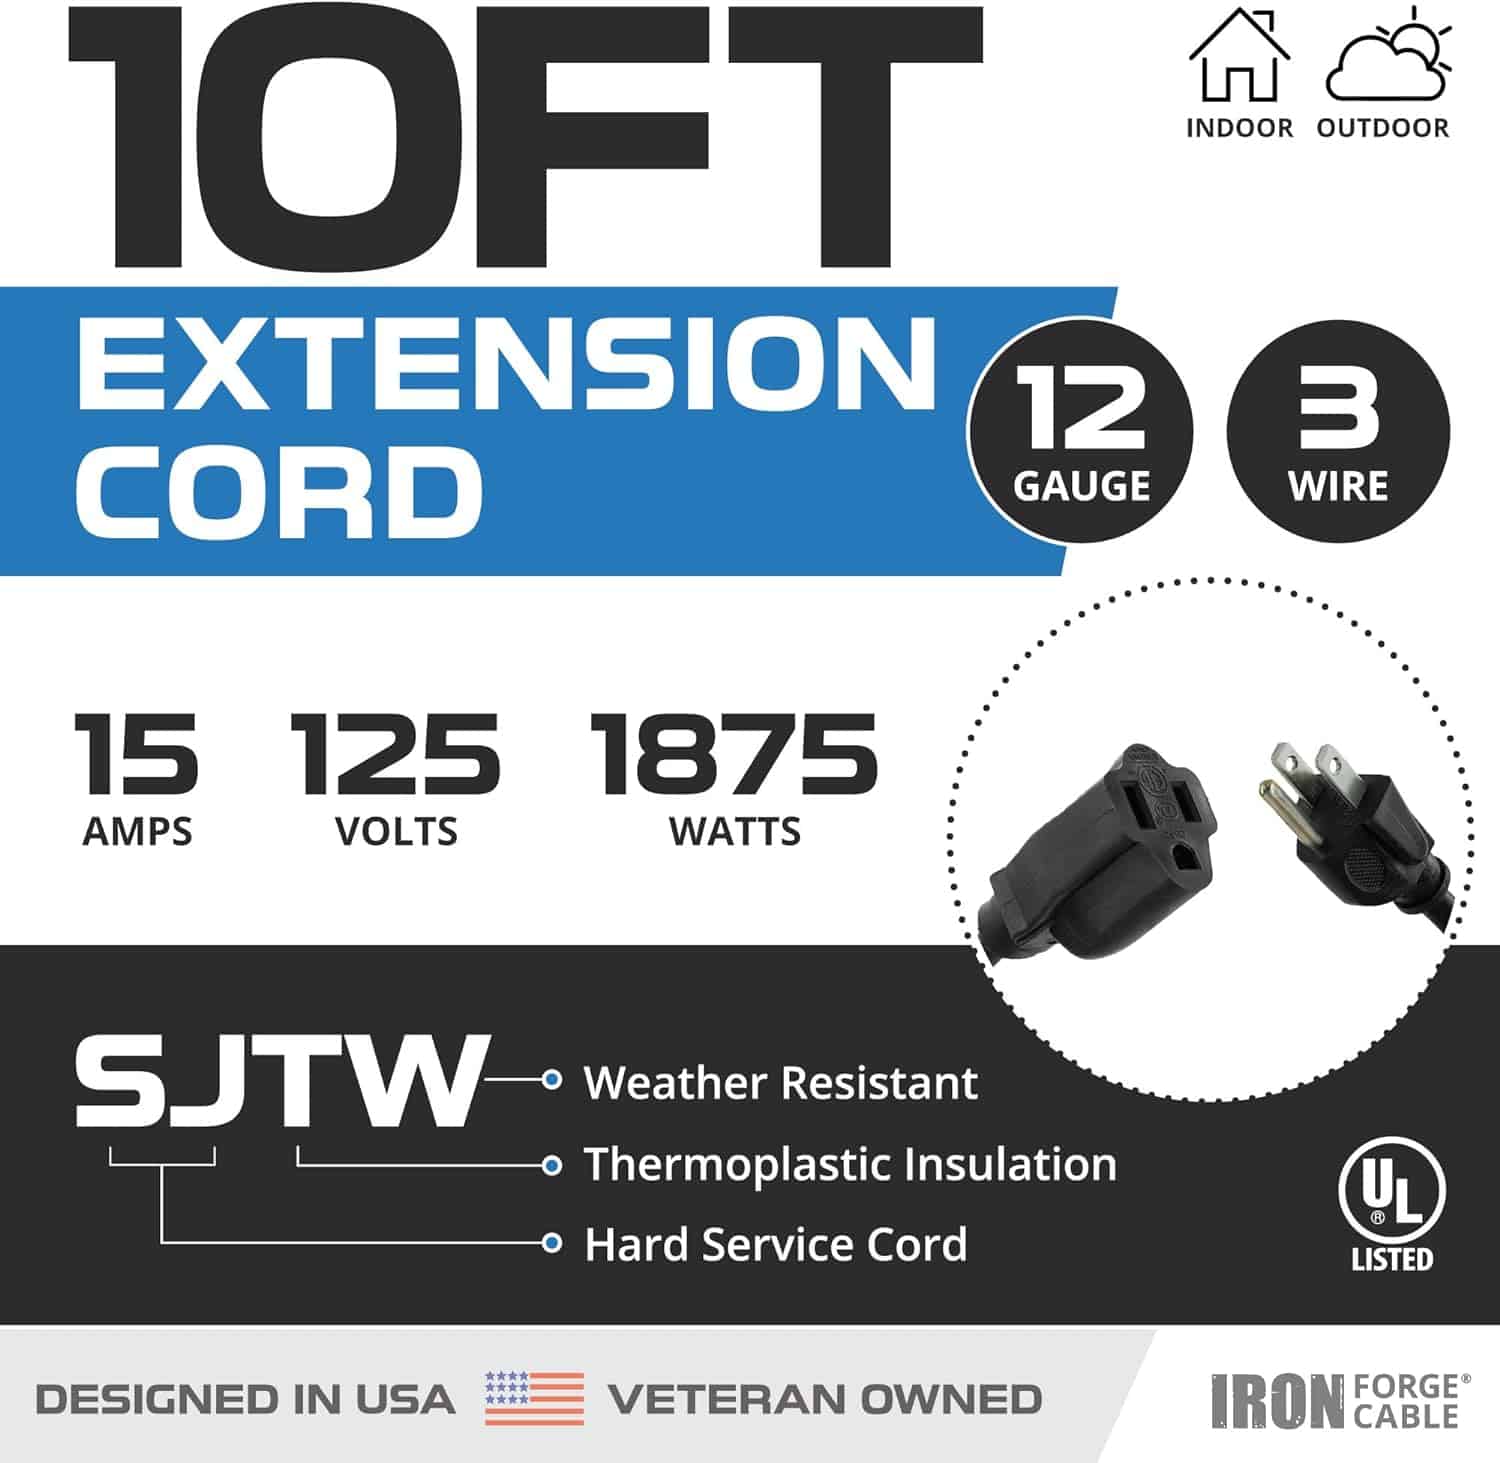 IRON FORGE CABLE 2 Pack of 10 Ft Heavy Duty Extension Cord Outdoor, 12 Gauge Extension Cord 10 ft 3 Prong, 12 3 Black Extension Cable for Major Appliances, US Veteran Owned 2